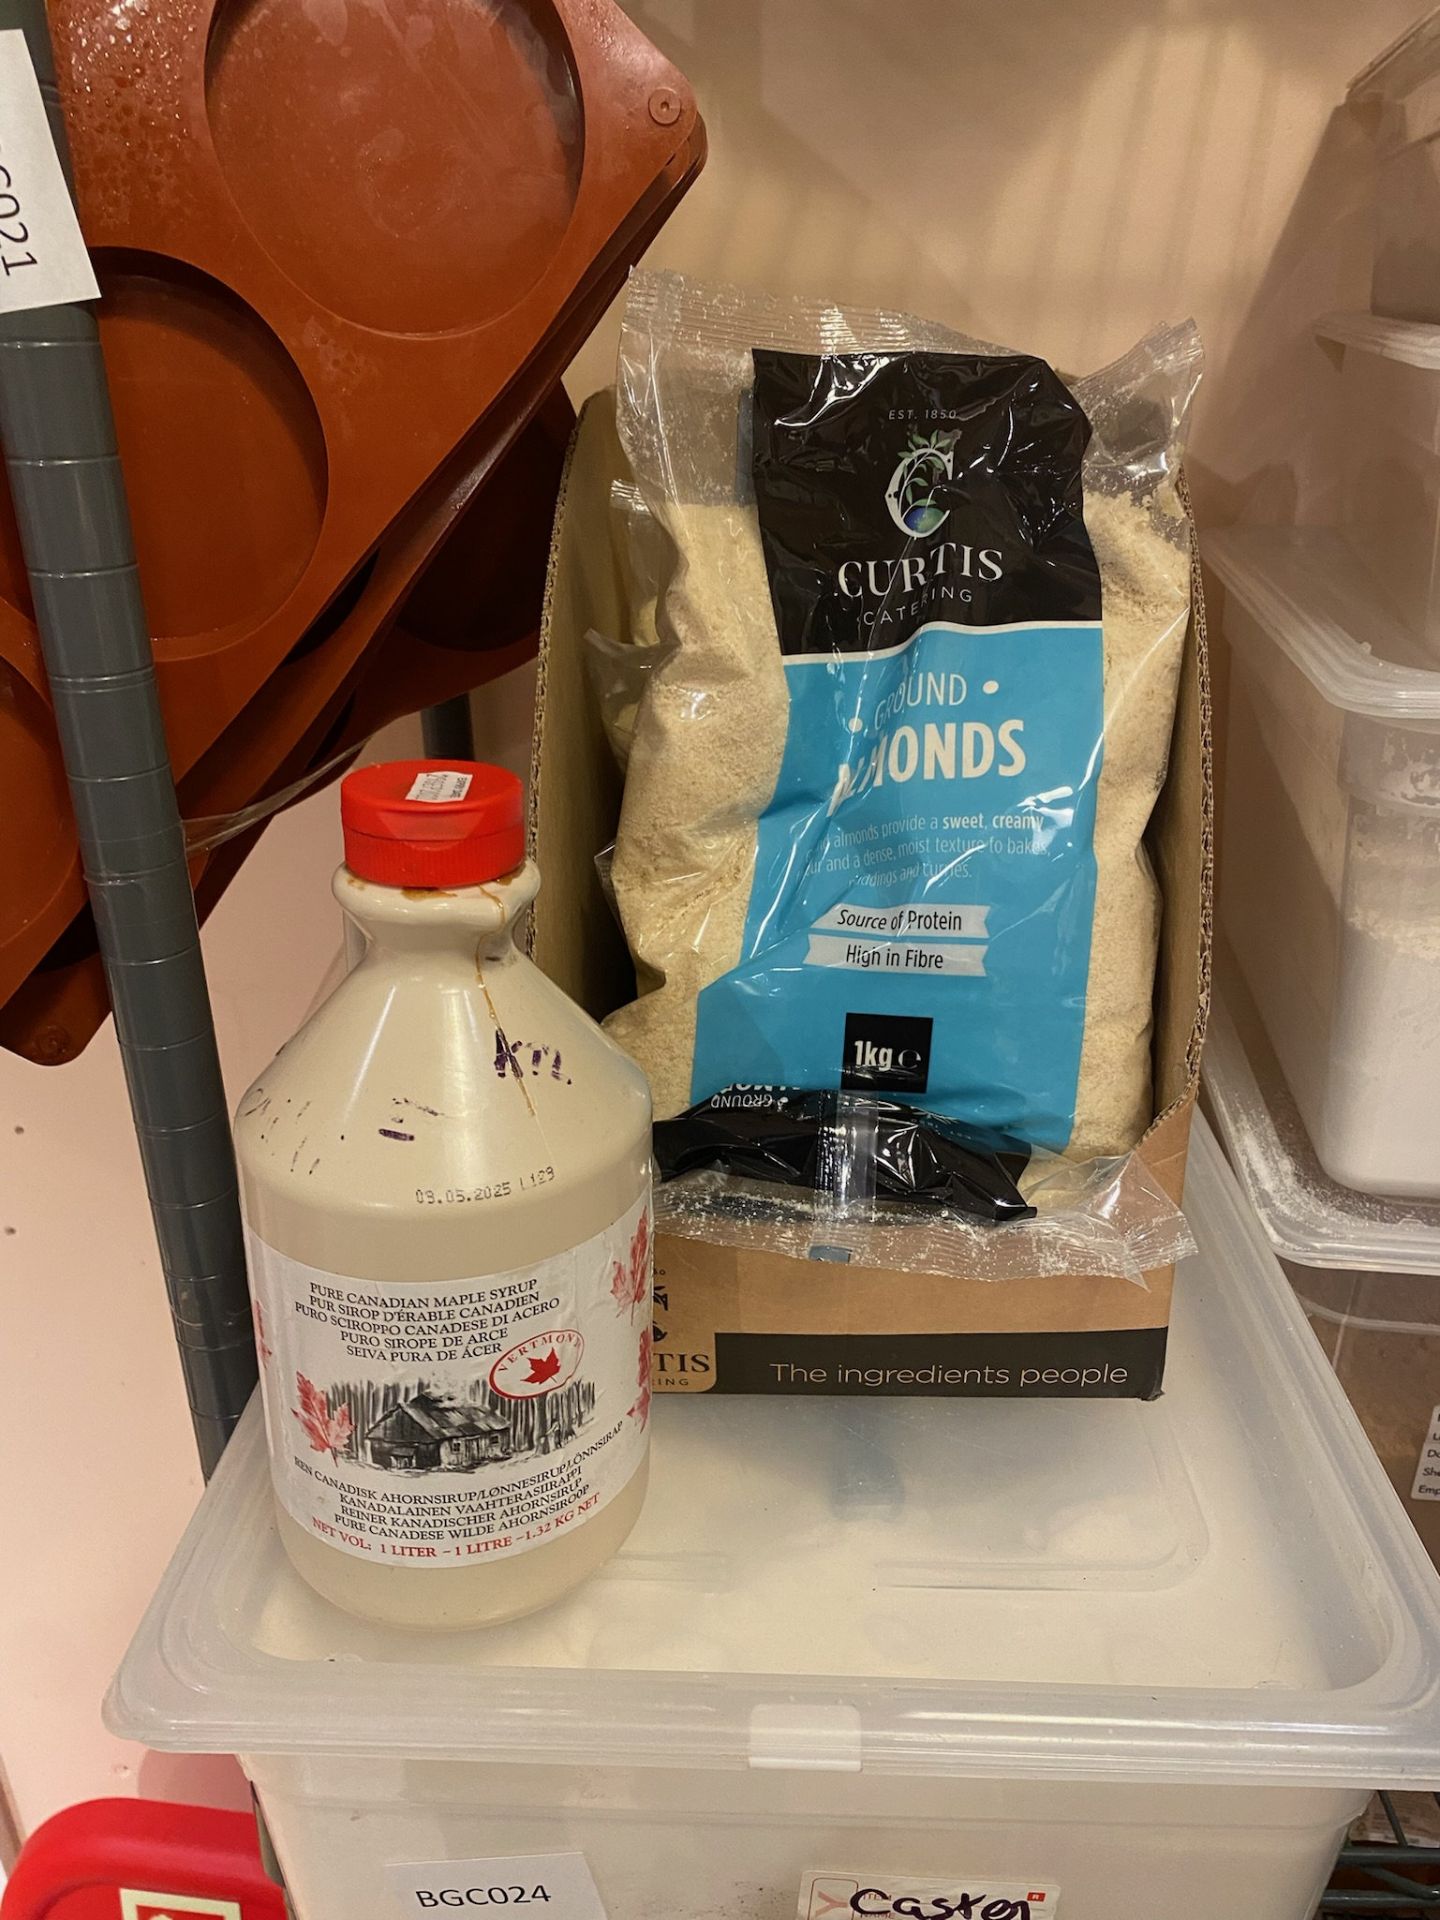 1 x Selection Of Cooking Ingredients As Shown Including Almond Flour, Icing Sugar, Brown Sugar, - Image 7 of 8